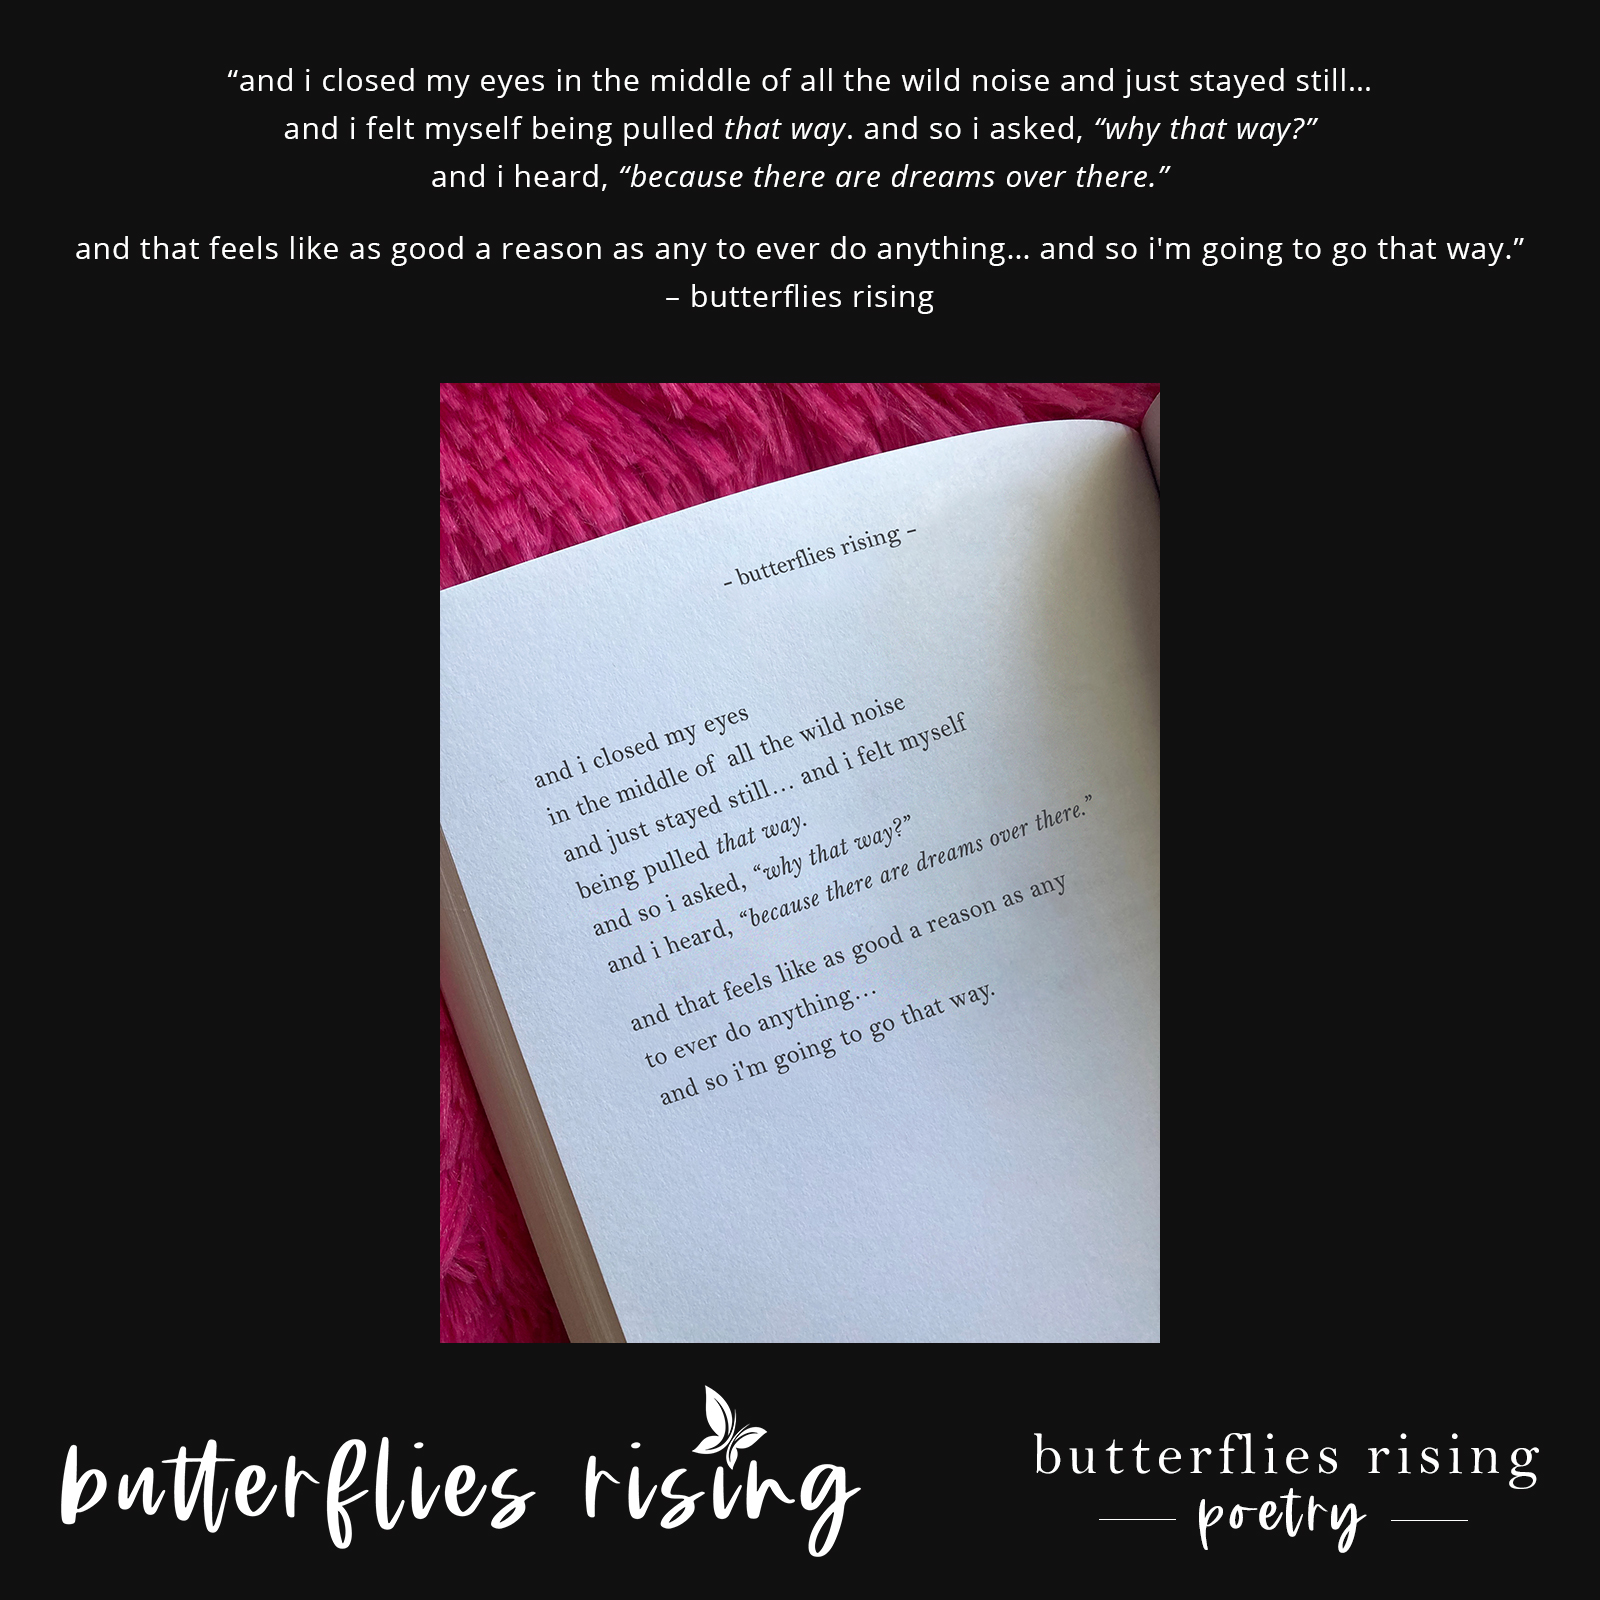 and i heard, because there are dreams over there - butterflies rising poem